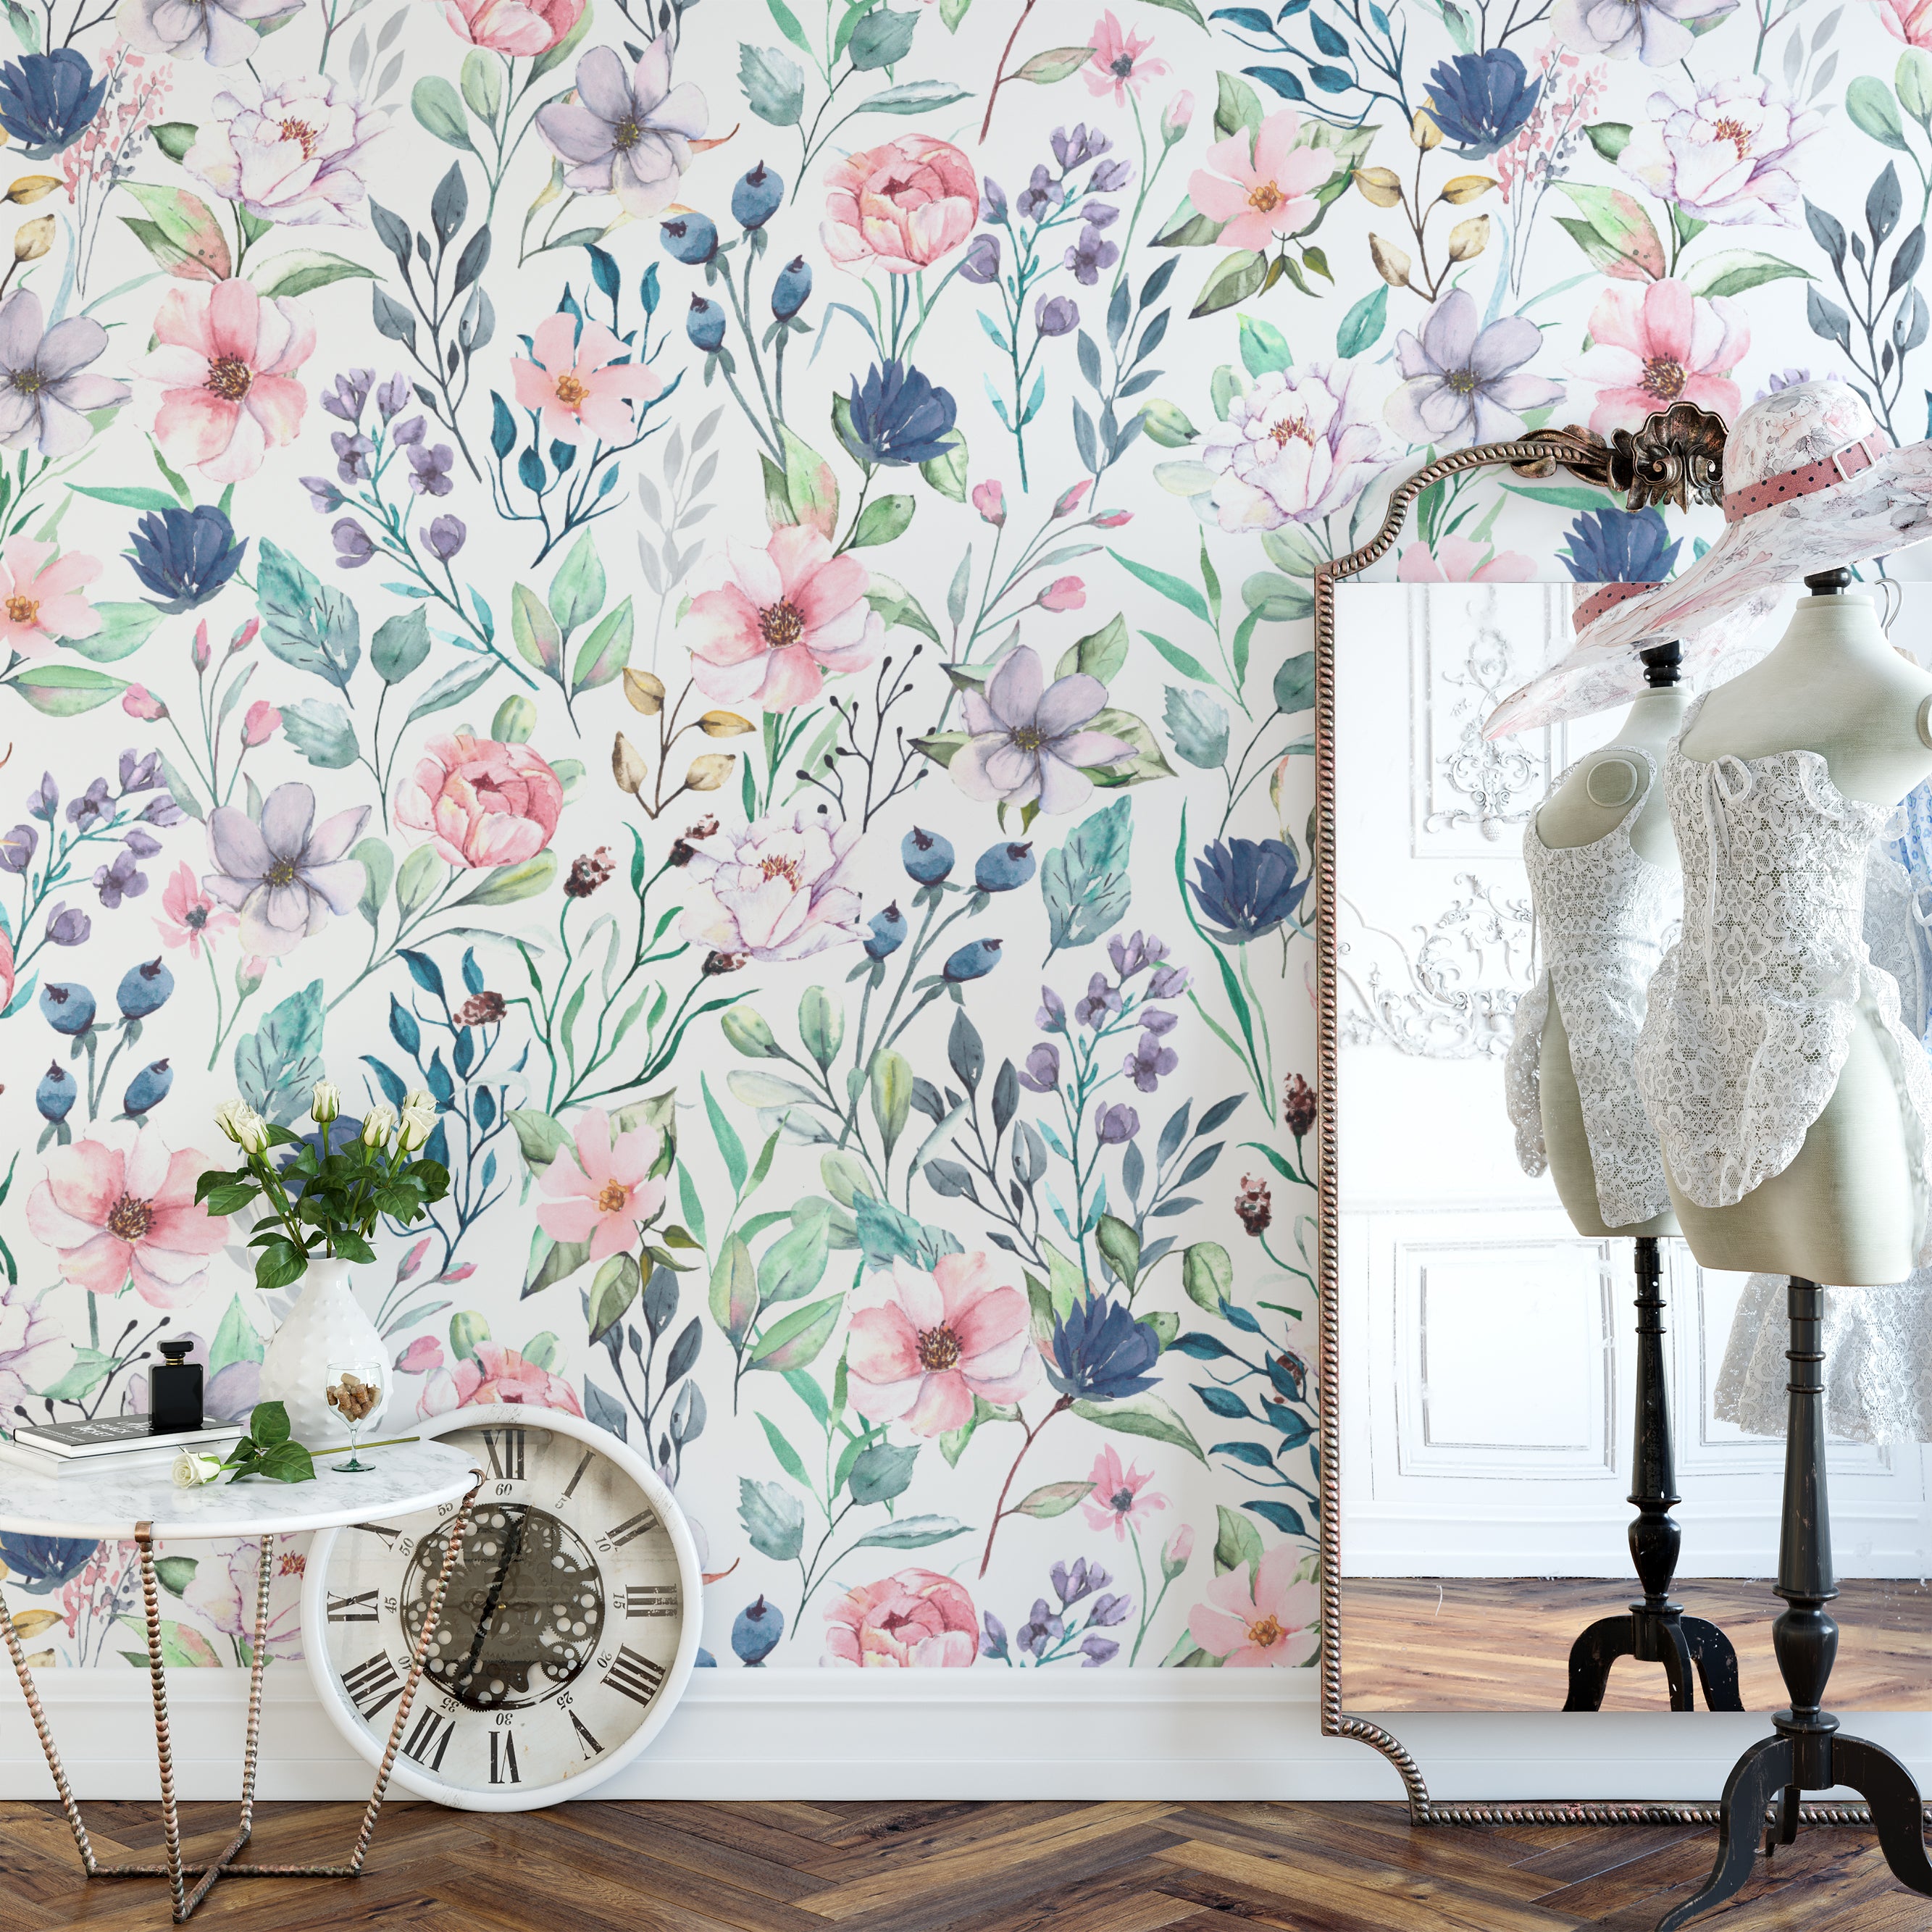 A boutique corner showcasing the Watercolor Floral Wallpaper IV, where the medium watercolor floral print adds a touch of elegance and a burst of color to the chic interior design.